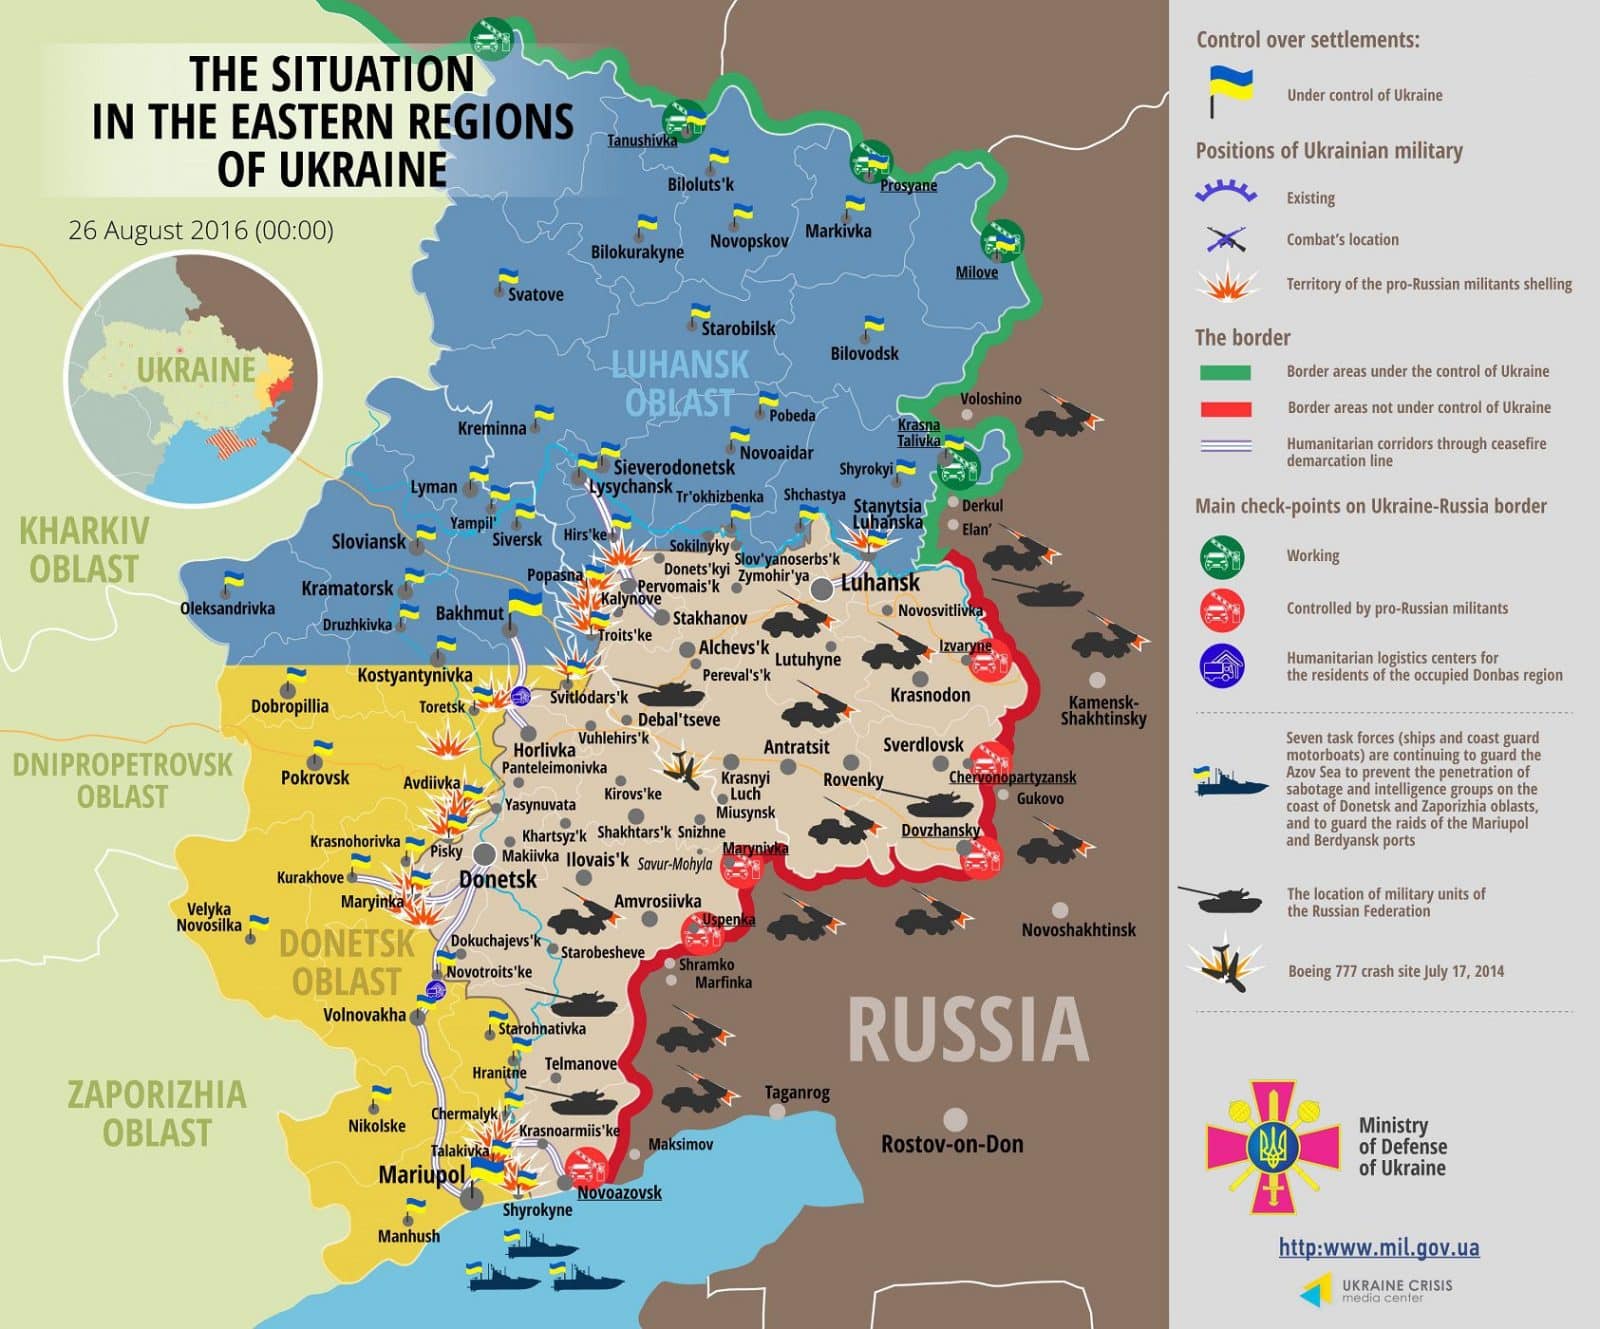 Russian troops attack Ukraine 48 times in past 24 hours, fire artillery near Avdiyivka